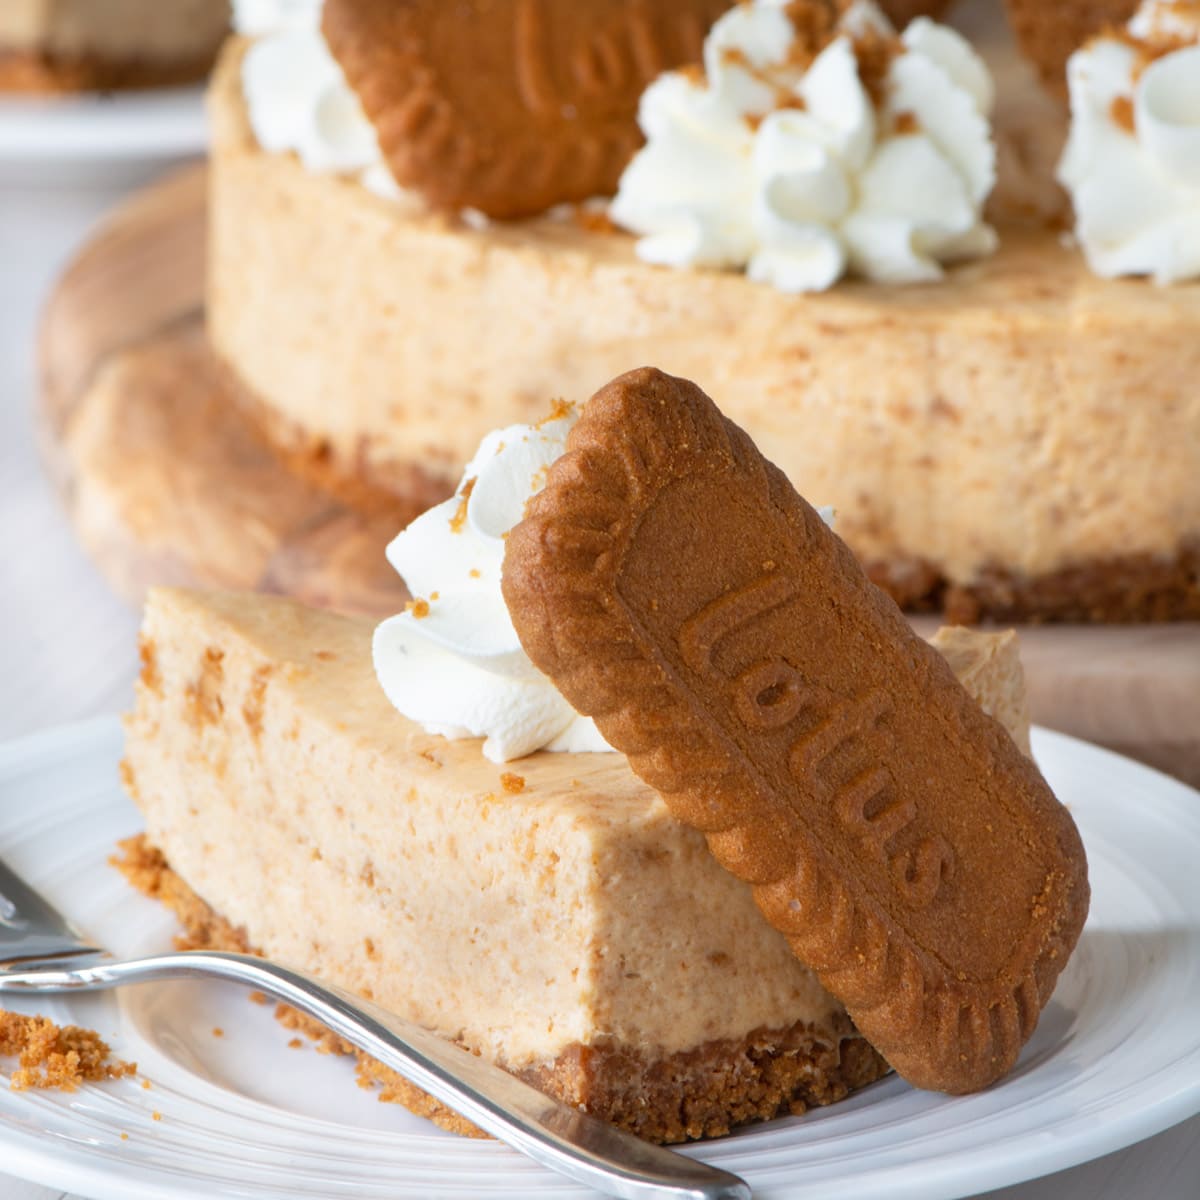 A slice of biscuit cheesecake served with a Biscoff biscuit.